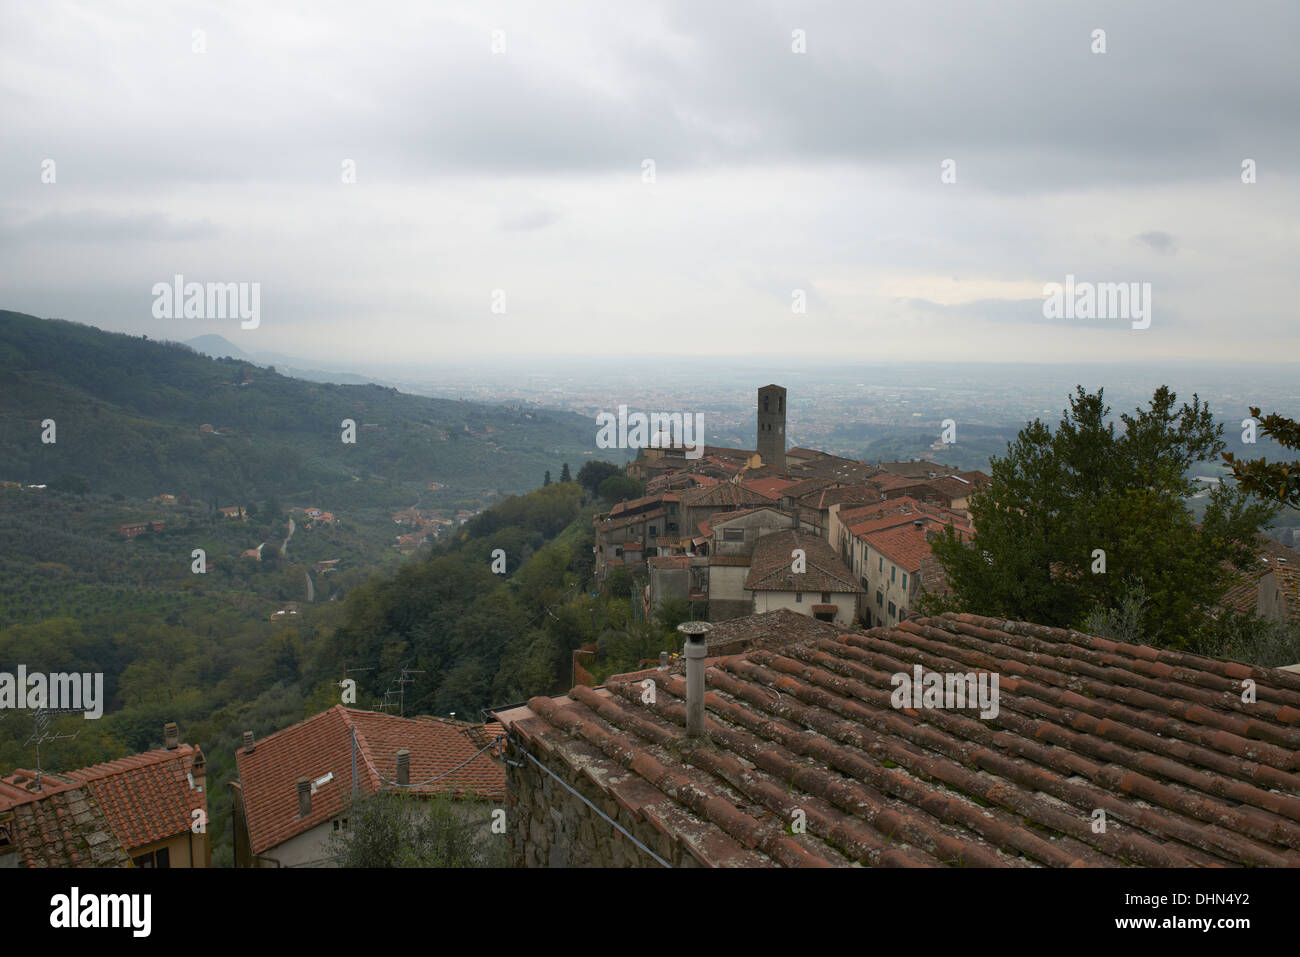 The view of the town of Massa from the highest point of the town looking at Montecatini Terme in the valley below Stock Photo